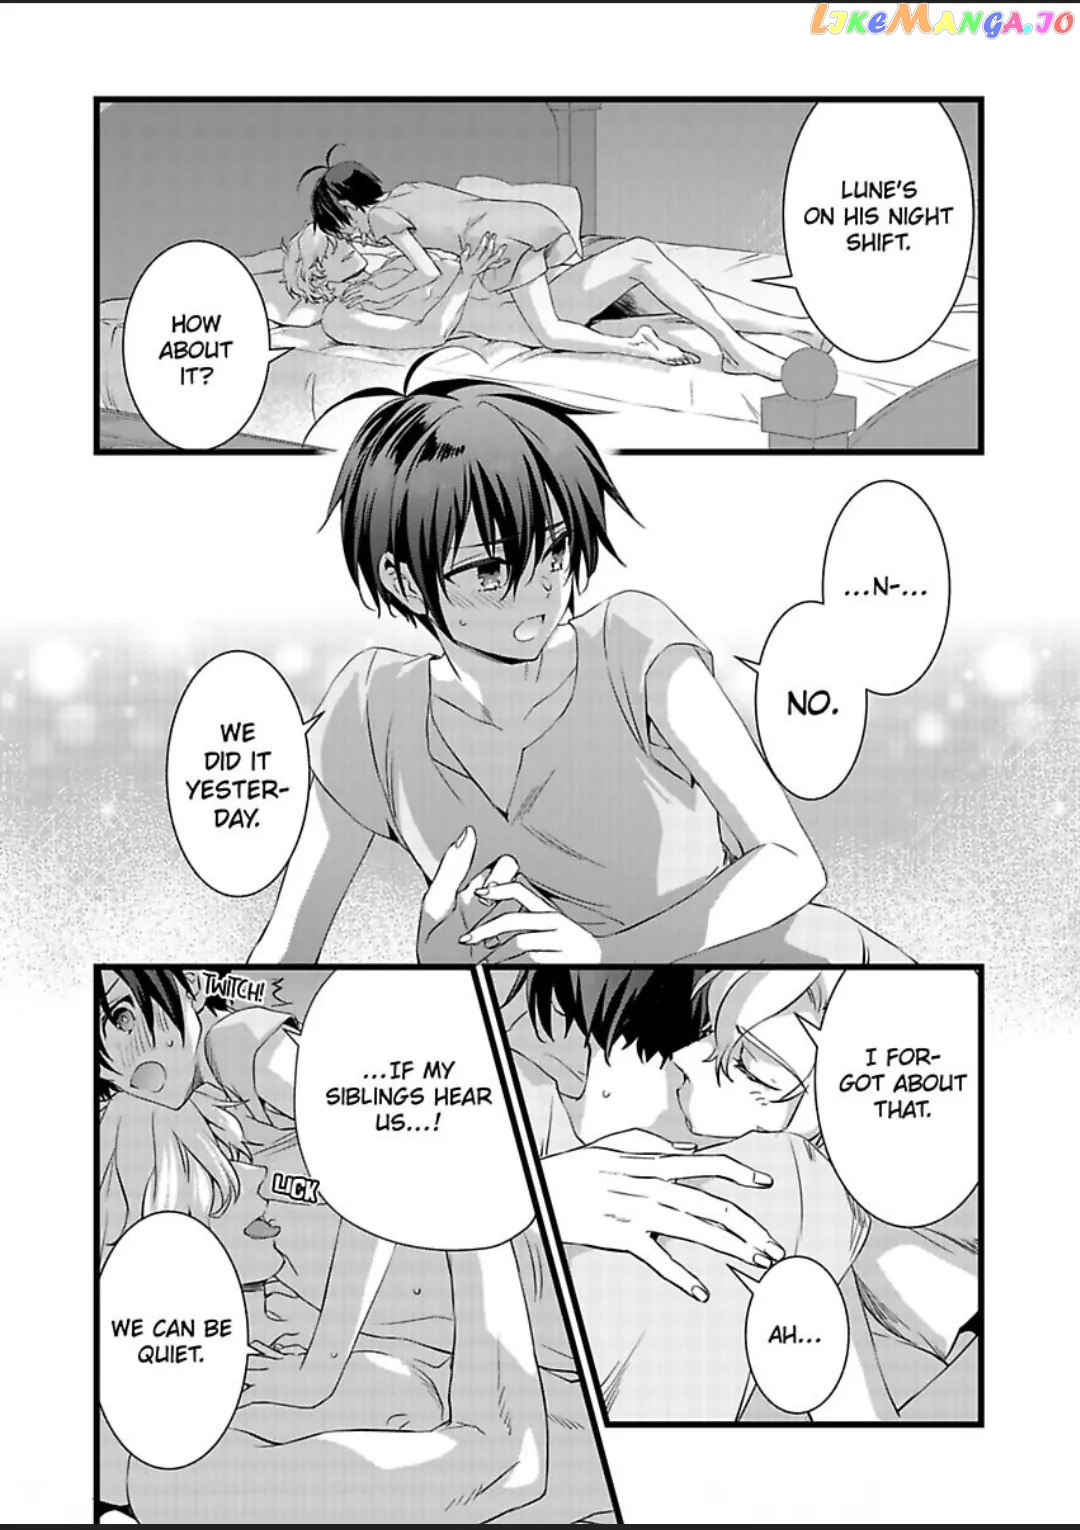 I Turned into a Girl and Turned on All the Knights! -I Need to Have S** to Turn Back!- - chapter 28 - #3